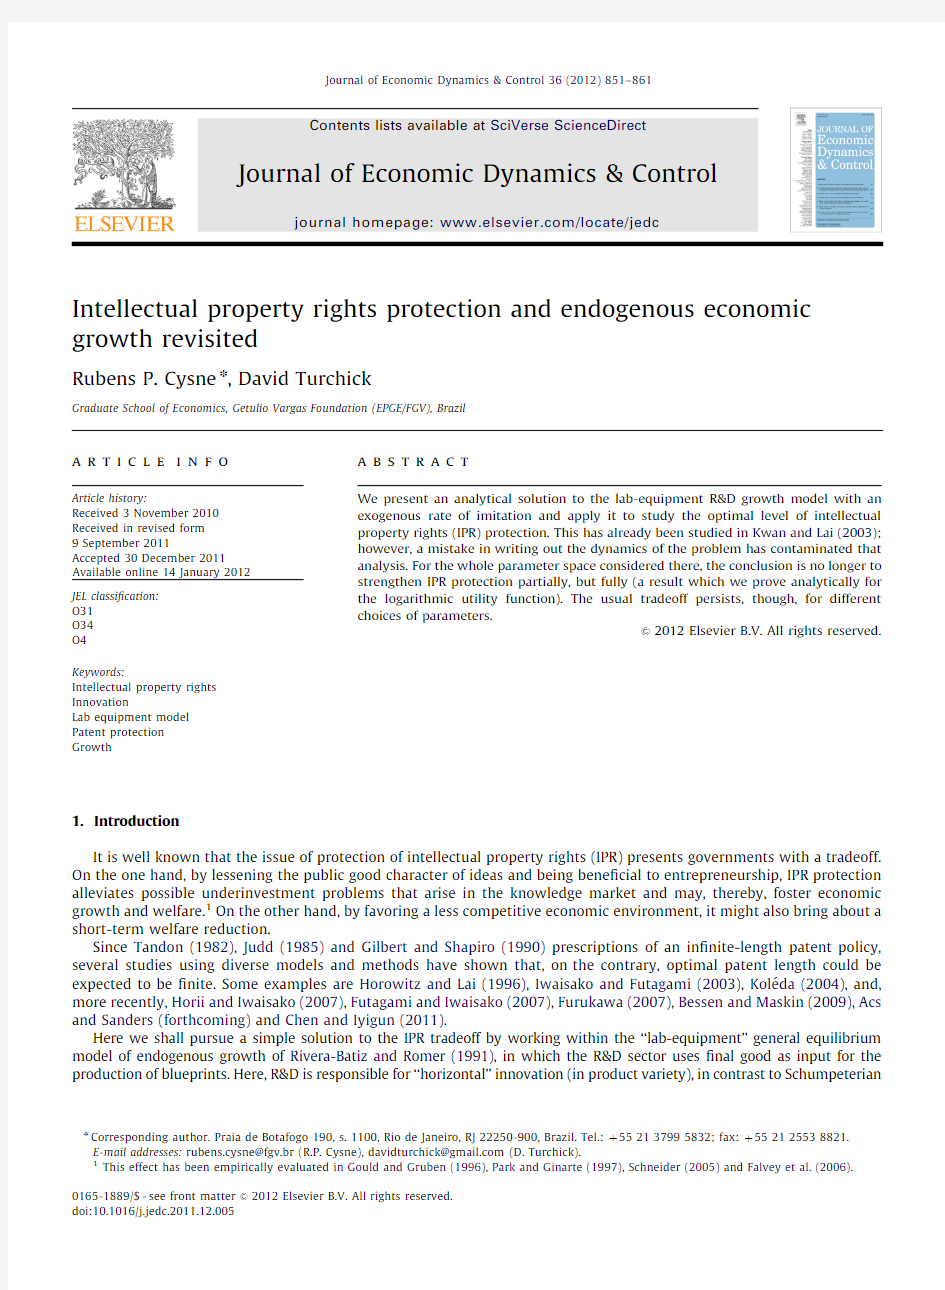 Intellectual property rights protection and endogenous economic growth revisited